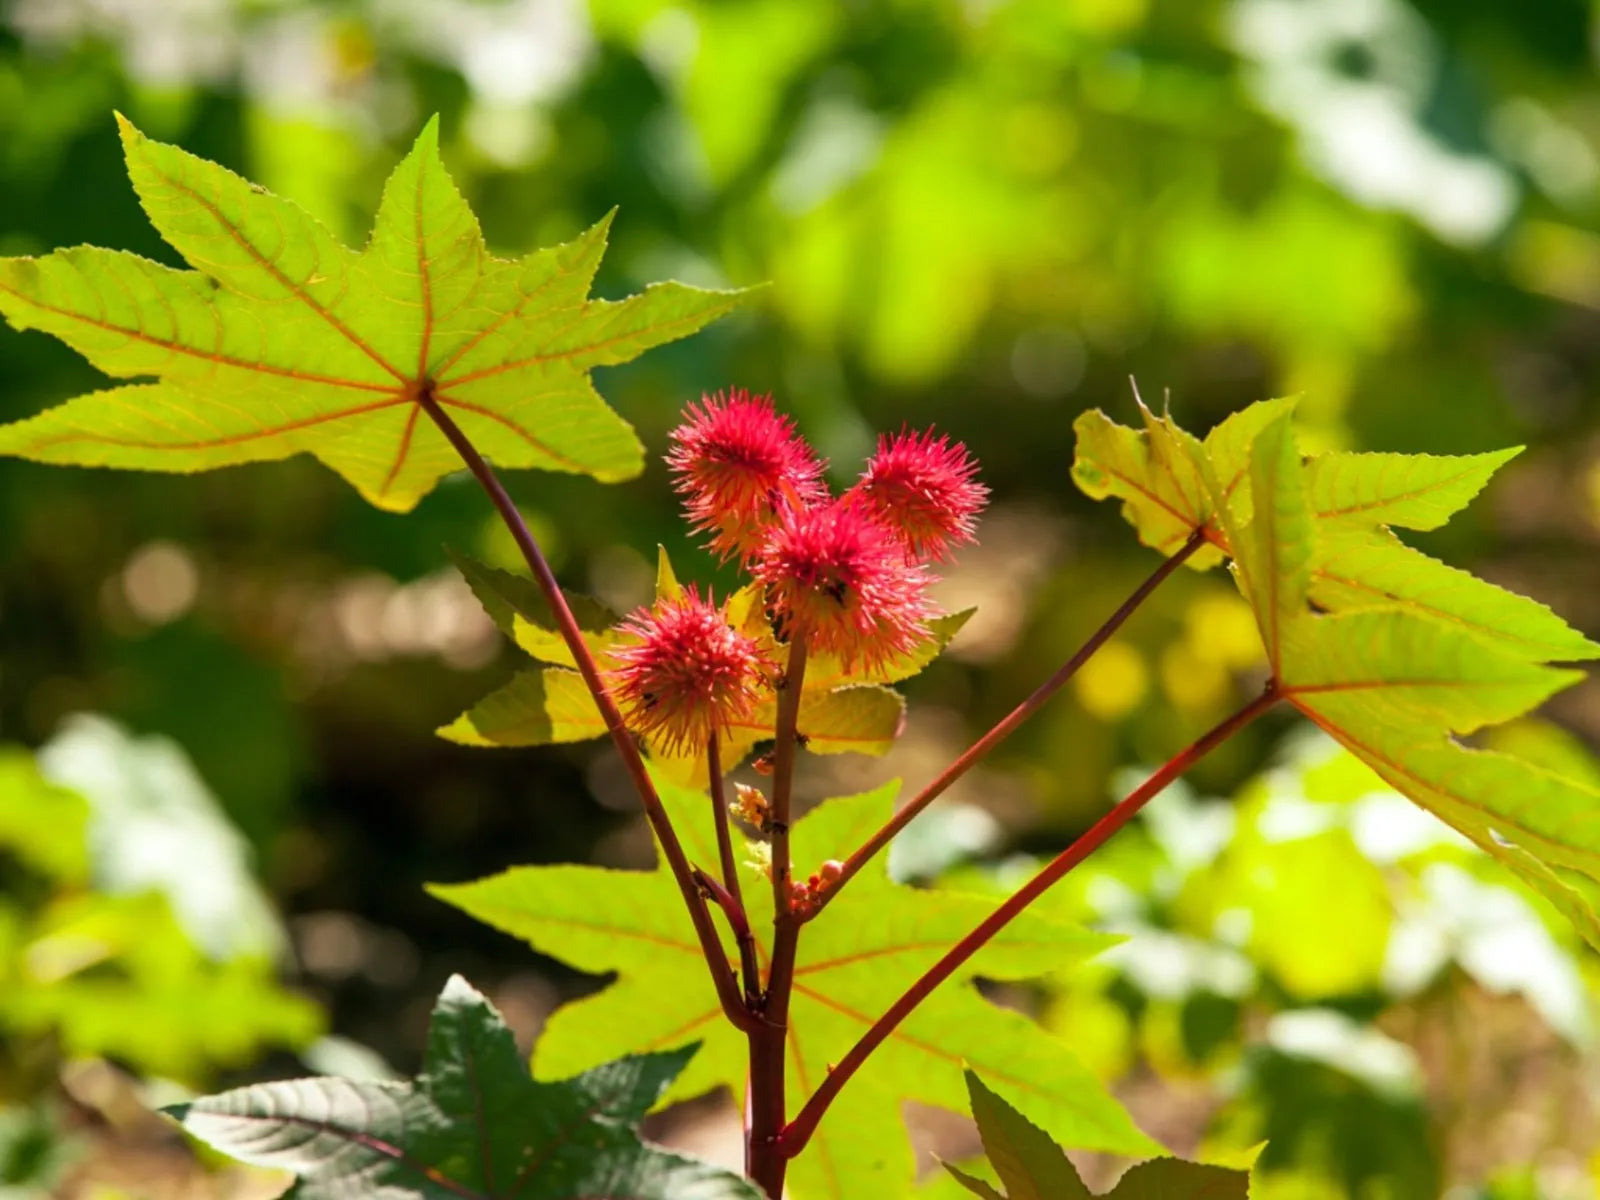 Image of a plant featuring vibrant red, spiky seed pods at the center, supported by reddish stems. The plant has large, palmate green leaves with edges tinted red, sitting against a backdrop of lush, blurred green foliage.